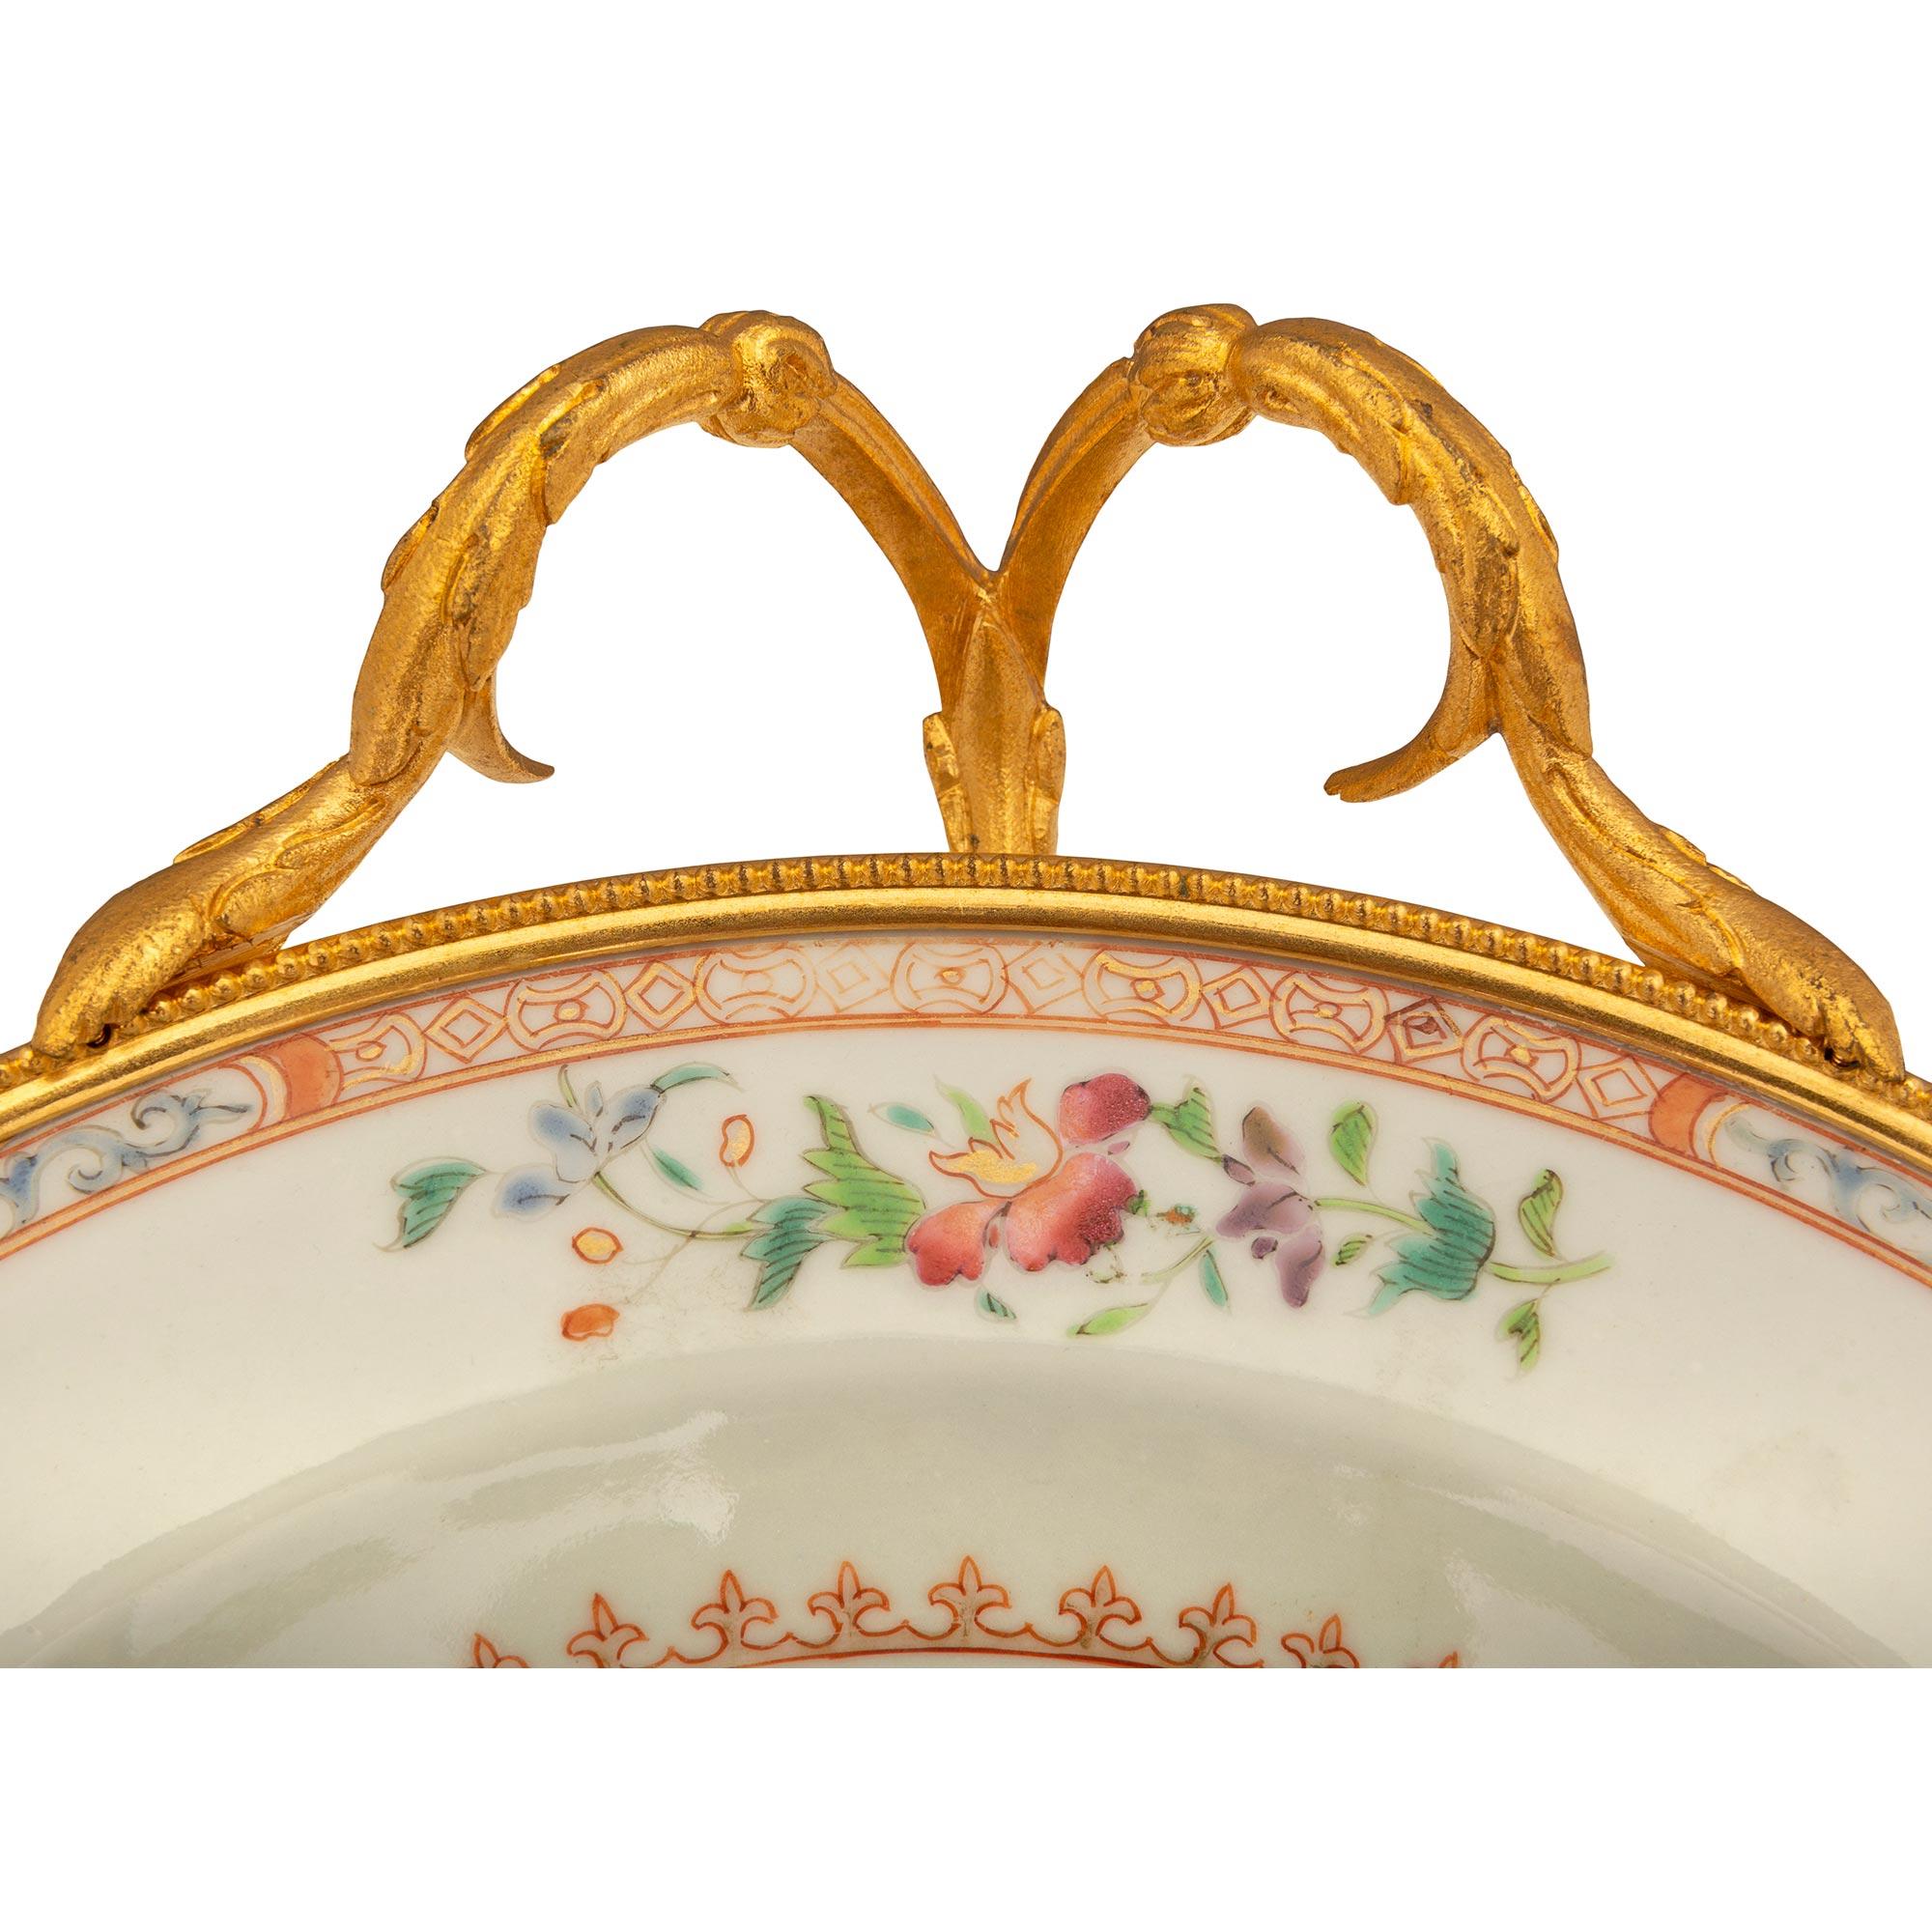 French 19th Century Famille Rose Porcelain and Ormolu Louis XVI St. Centerpiece For Sale 2